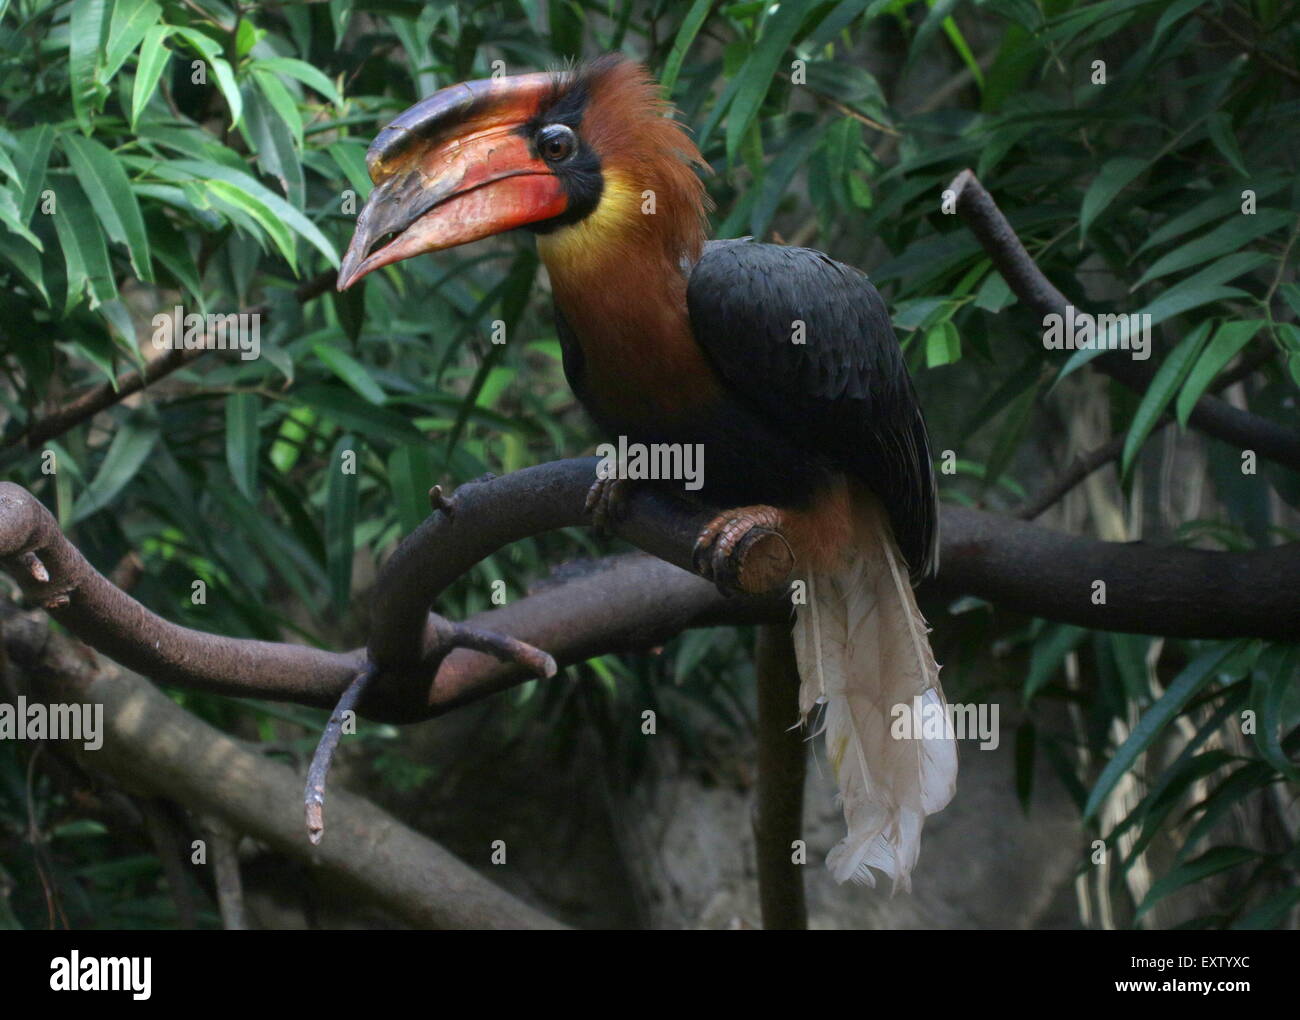 Male Asian Rufous hornbill (Buceros hydrocorax), also known as Philippine hornbill perched in a tree Stock Photo